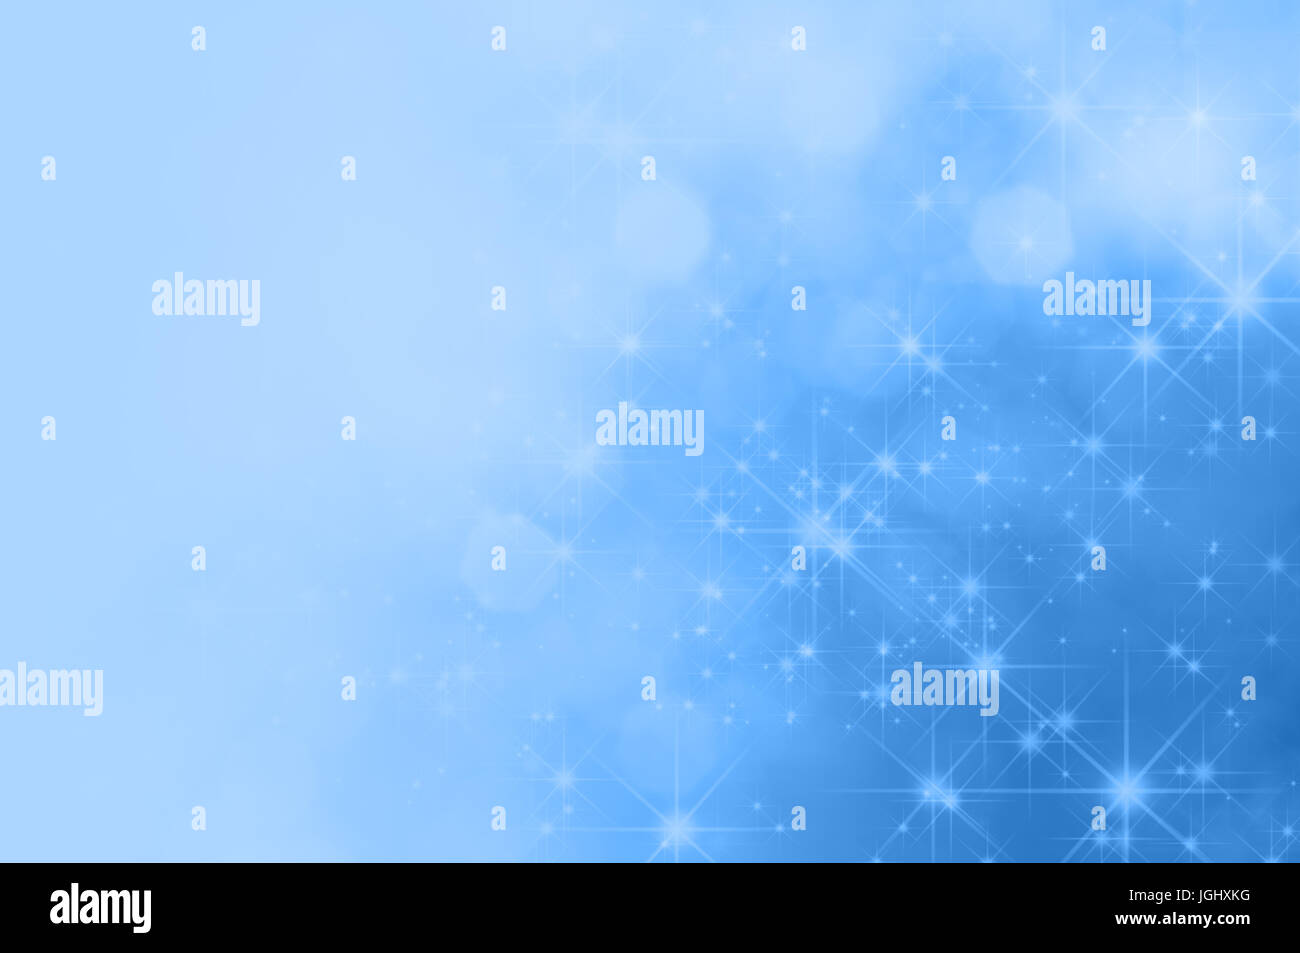 Blue Sparkly Background Stock Photos Blue Sparkly Background